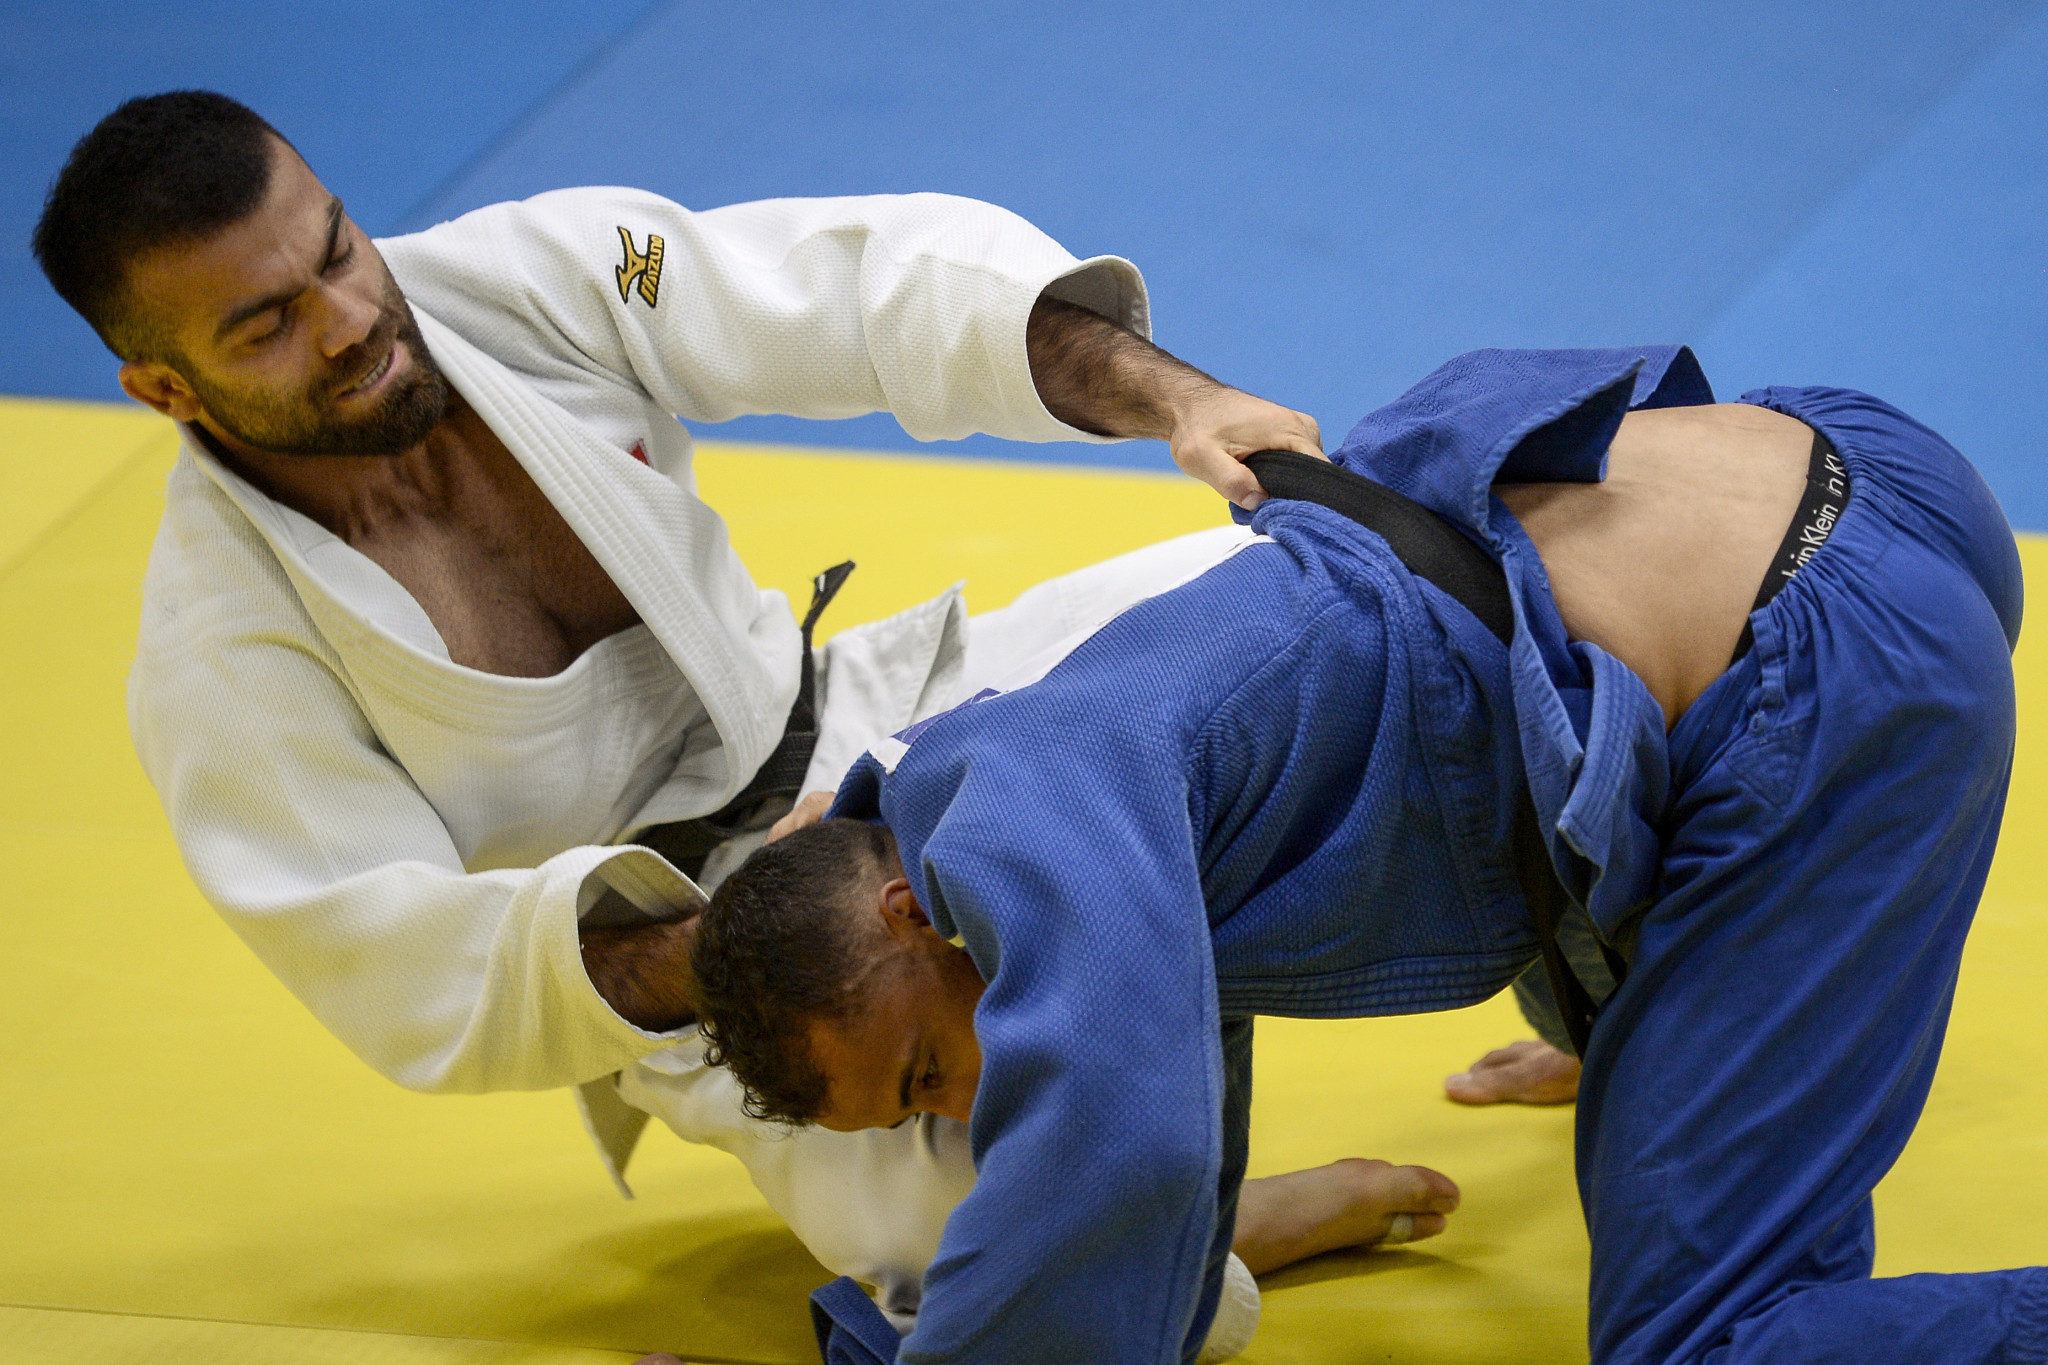 Darwish among judo winners at Mediterranean Games as medals come thick and fast at Tarragona 2018